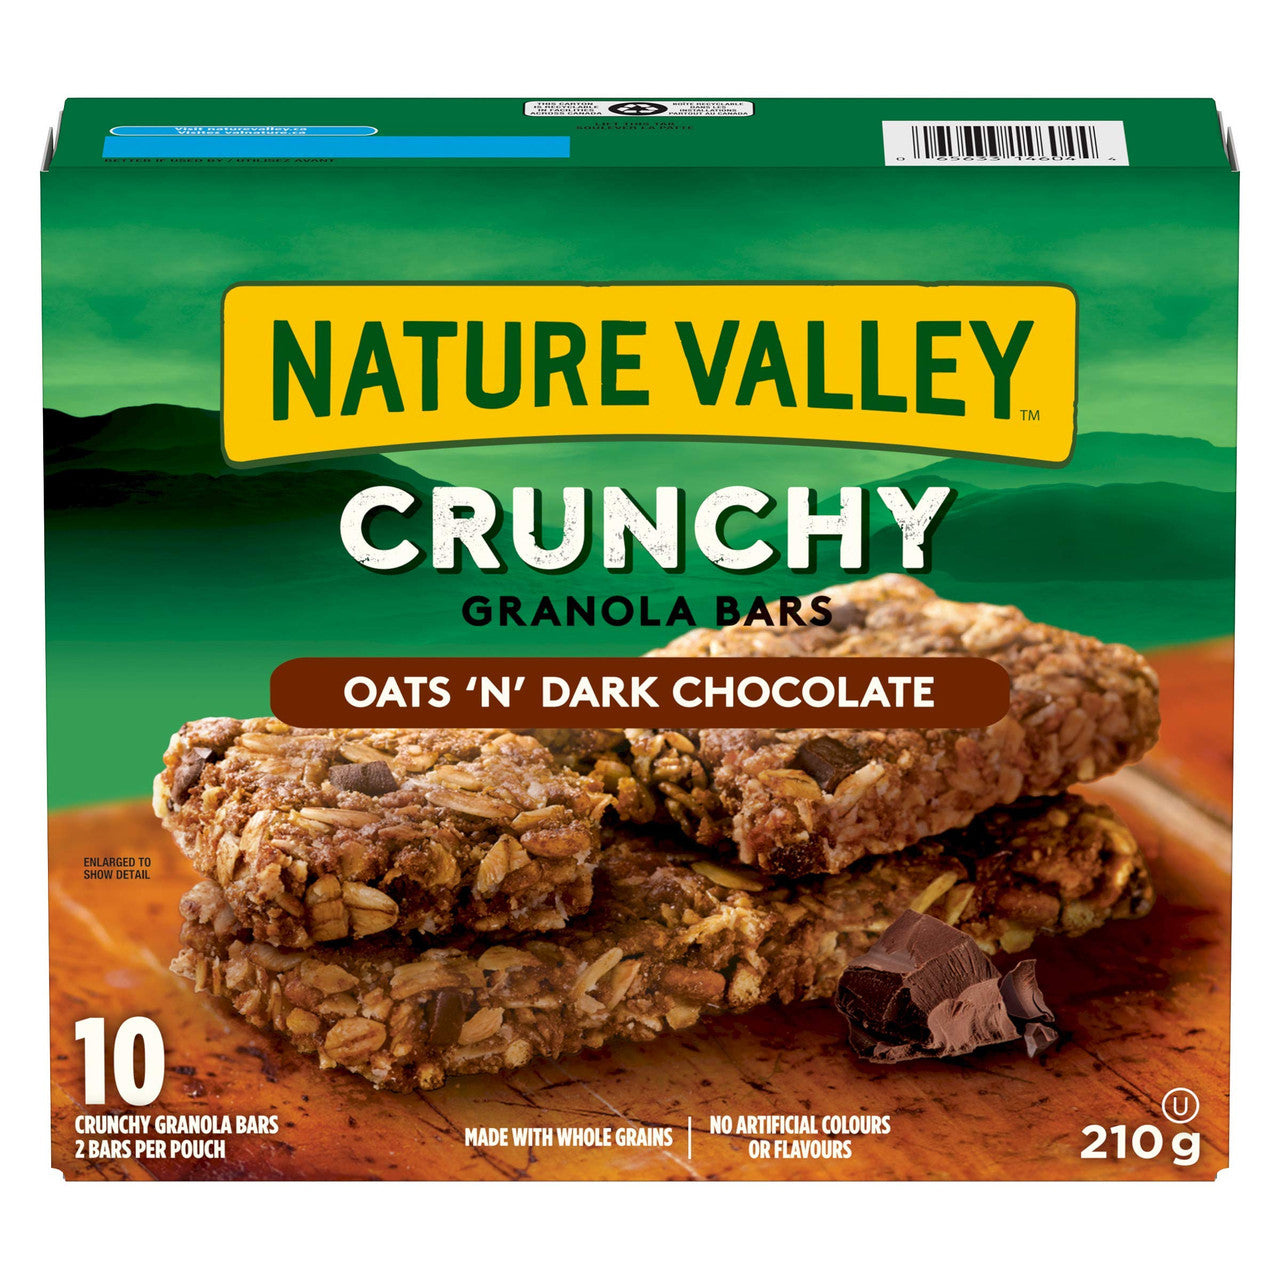 NATURE VALLEY Crunchy Granola Bar Oats and Dark Chocolate (10ct Box), 210g/7.4 oz., {Imported from Canada}